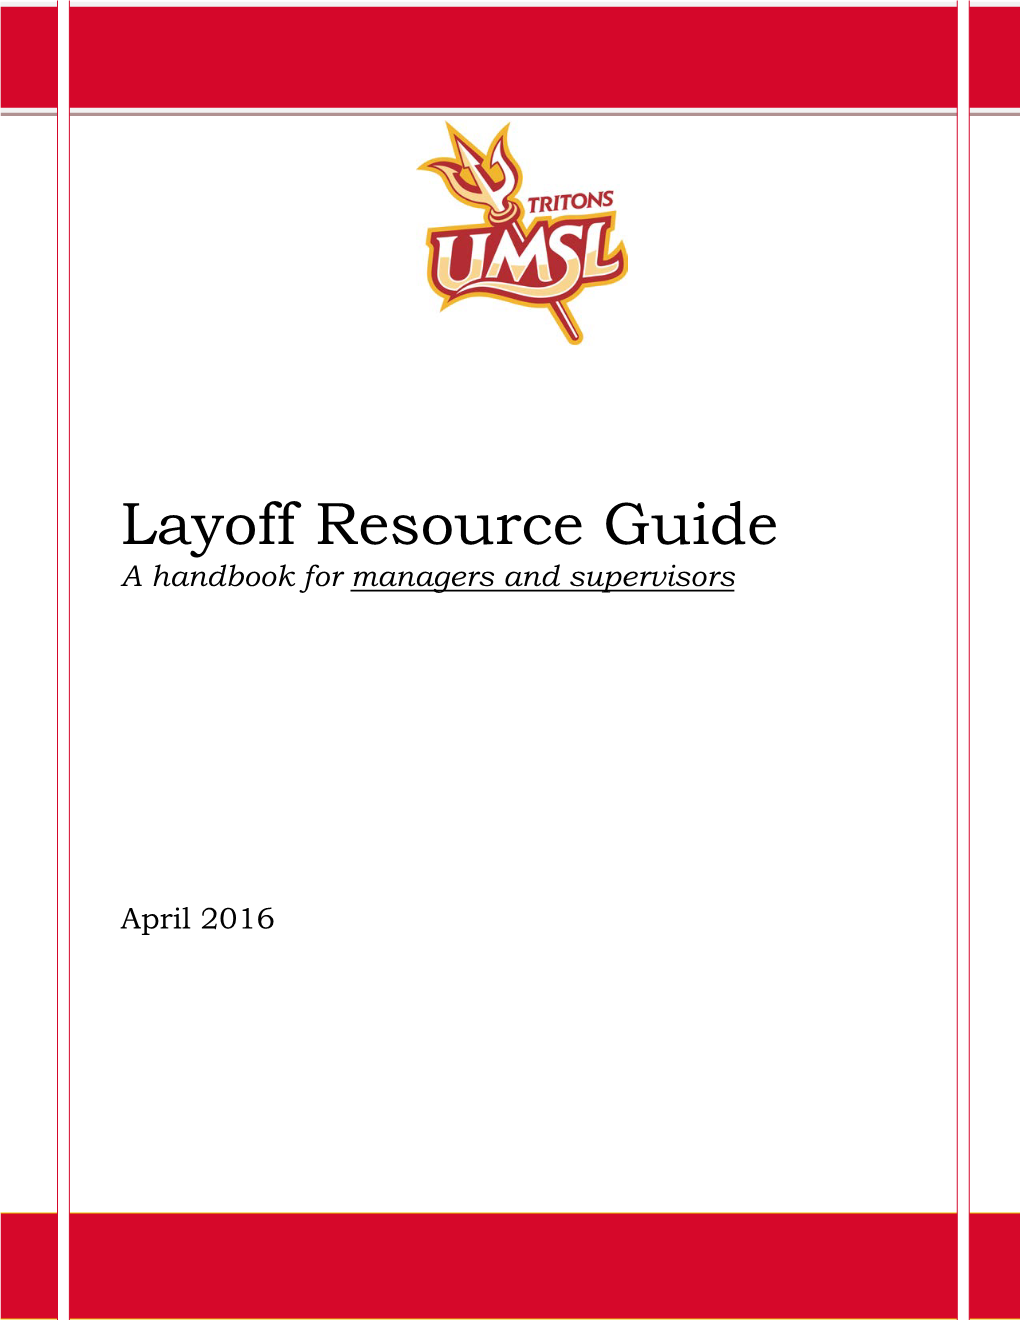 Manager's Layoff Guide